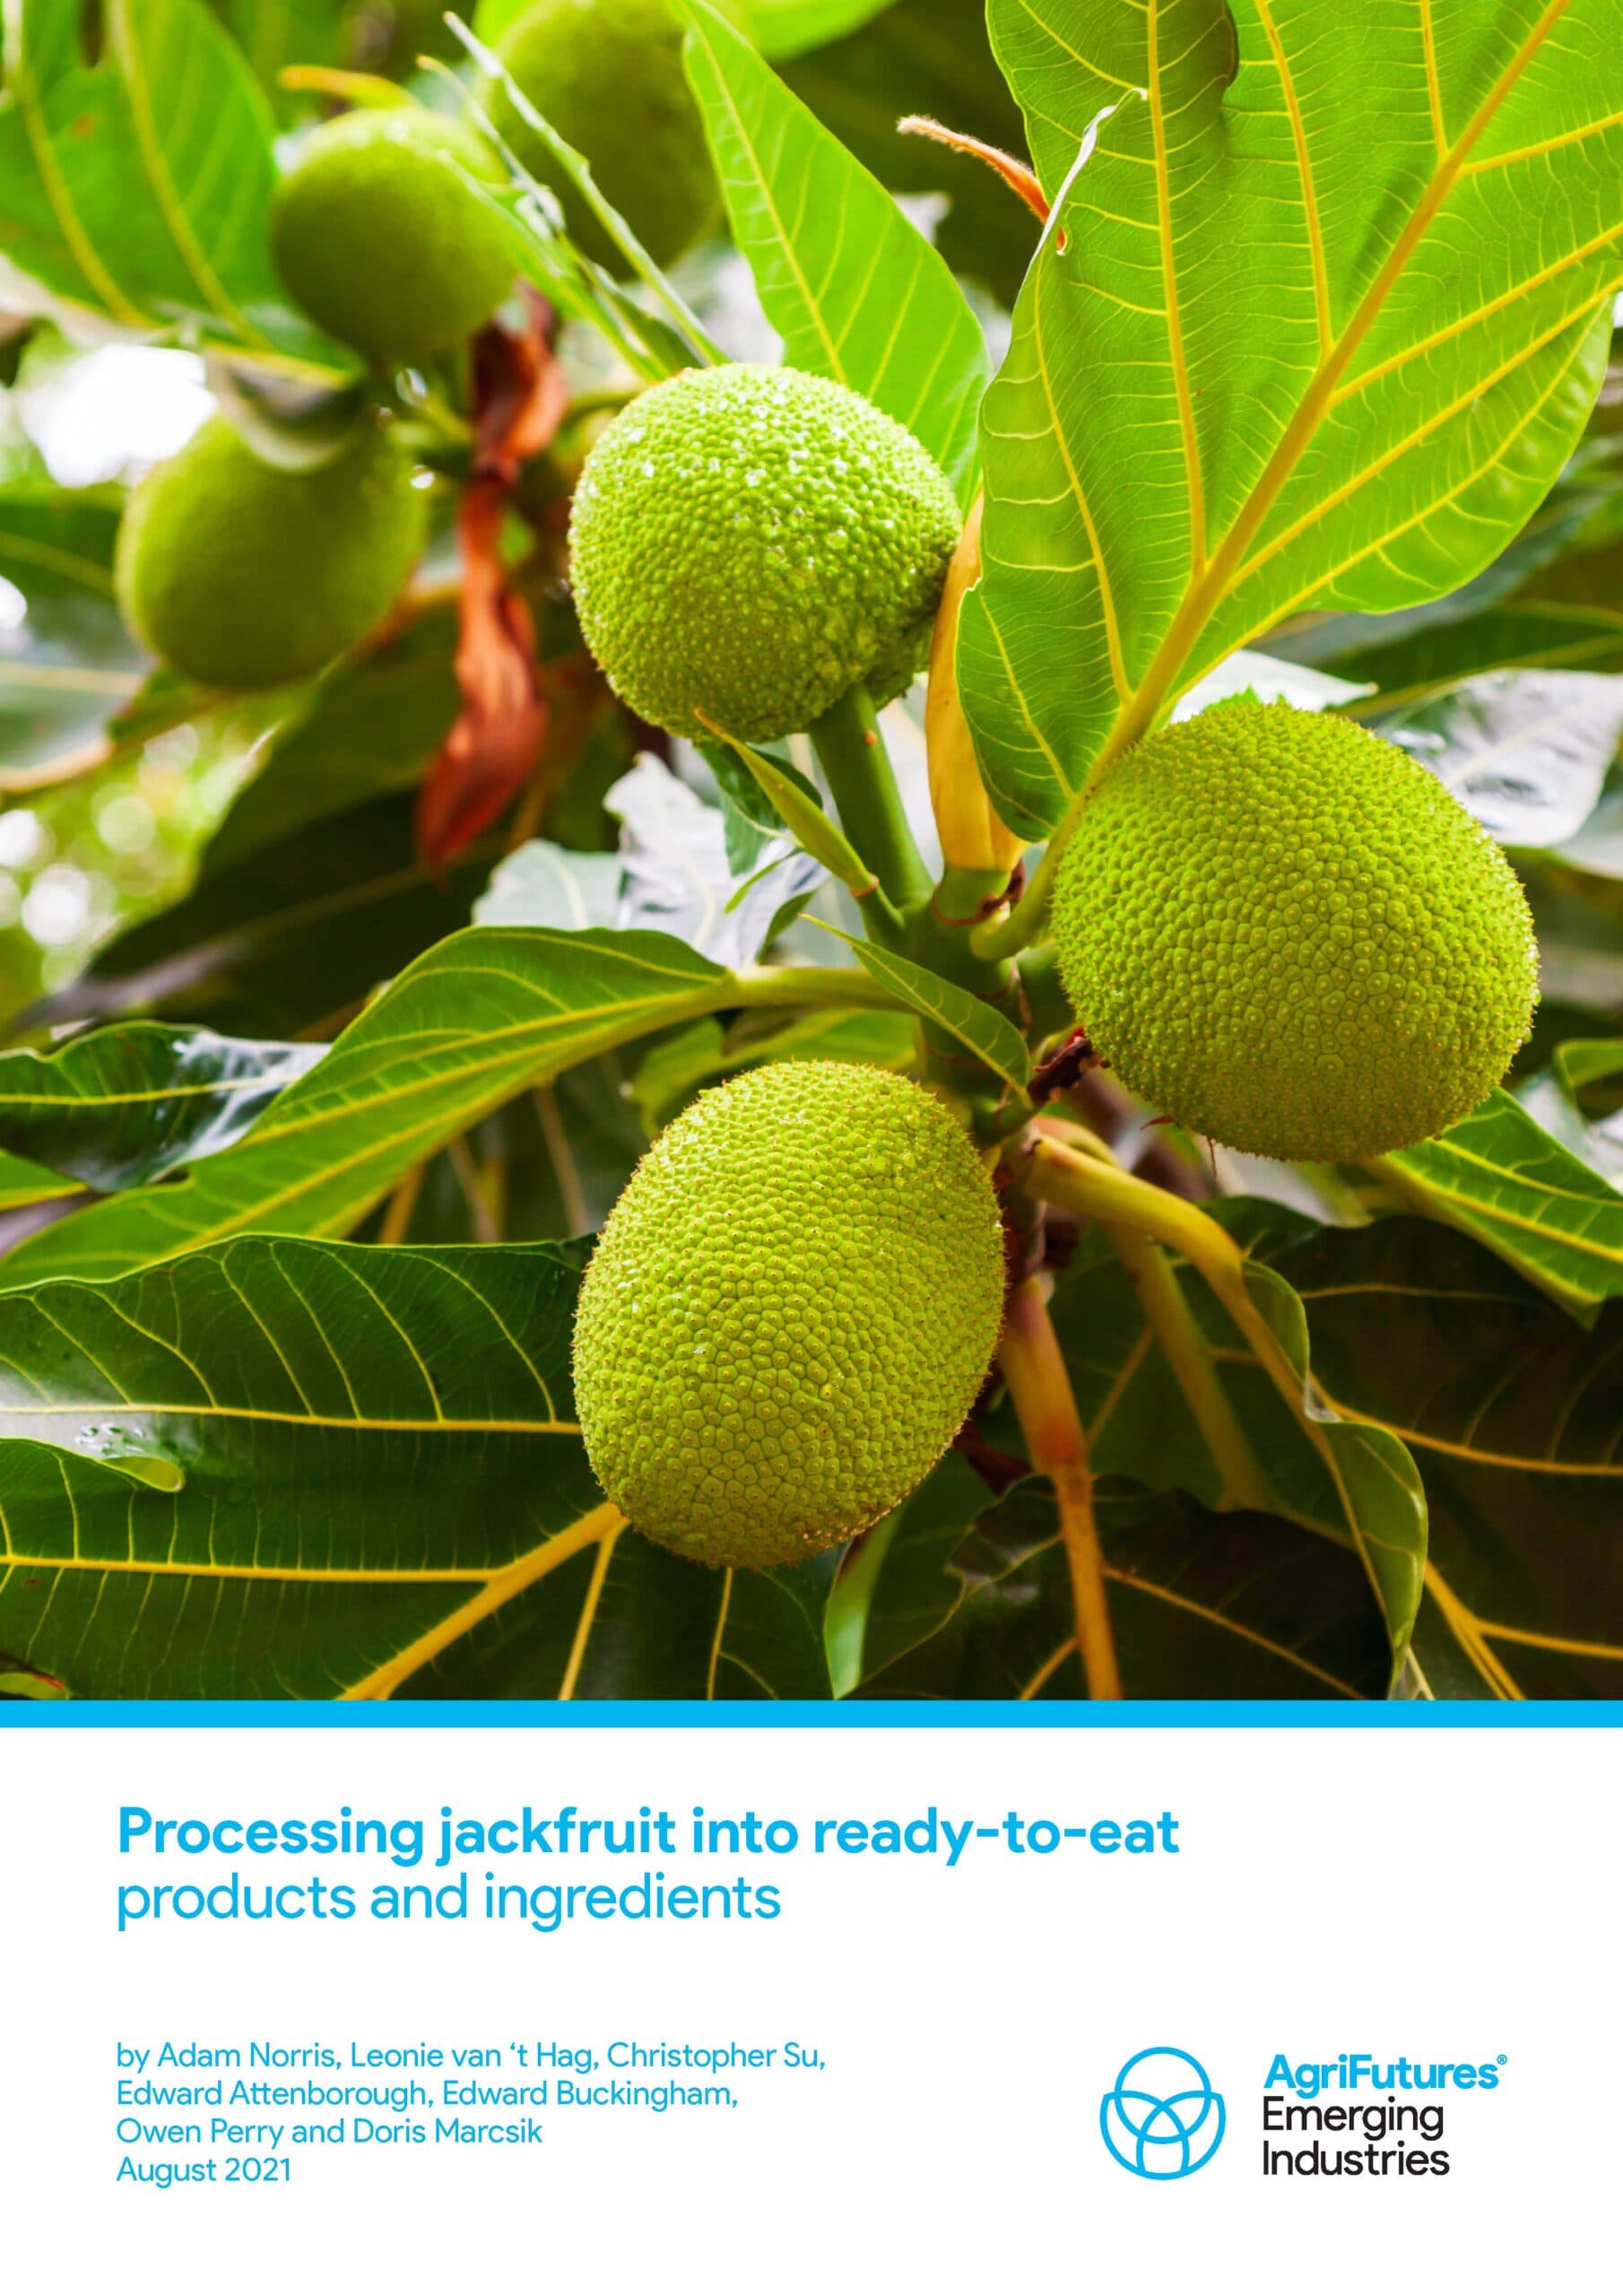 Processing jackfruit into ready-to-eat products and ingredients - image